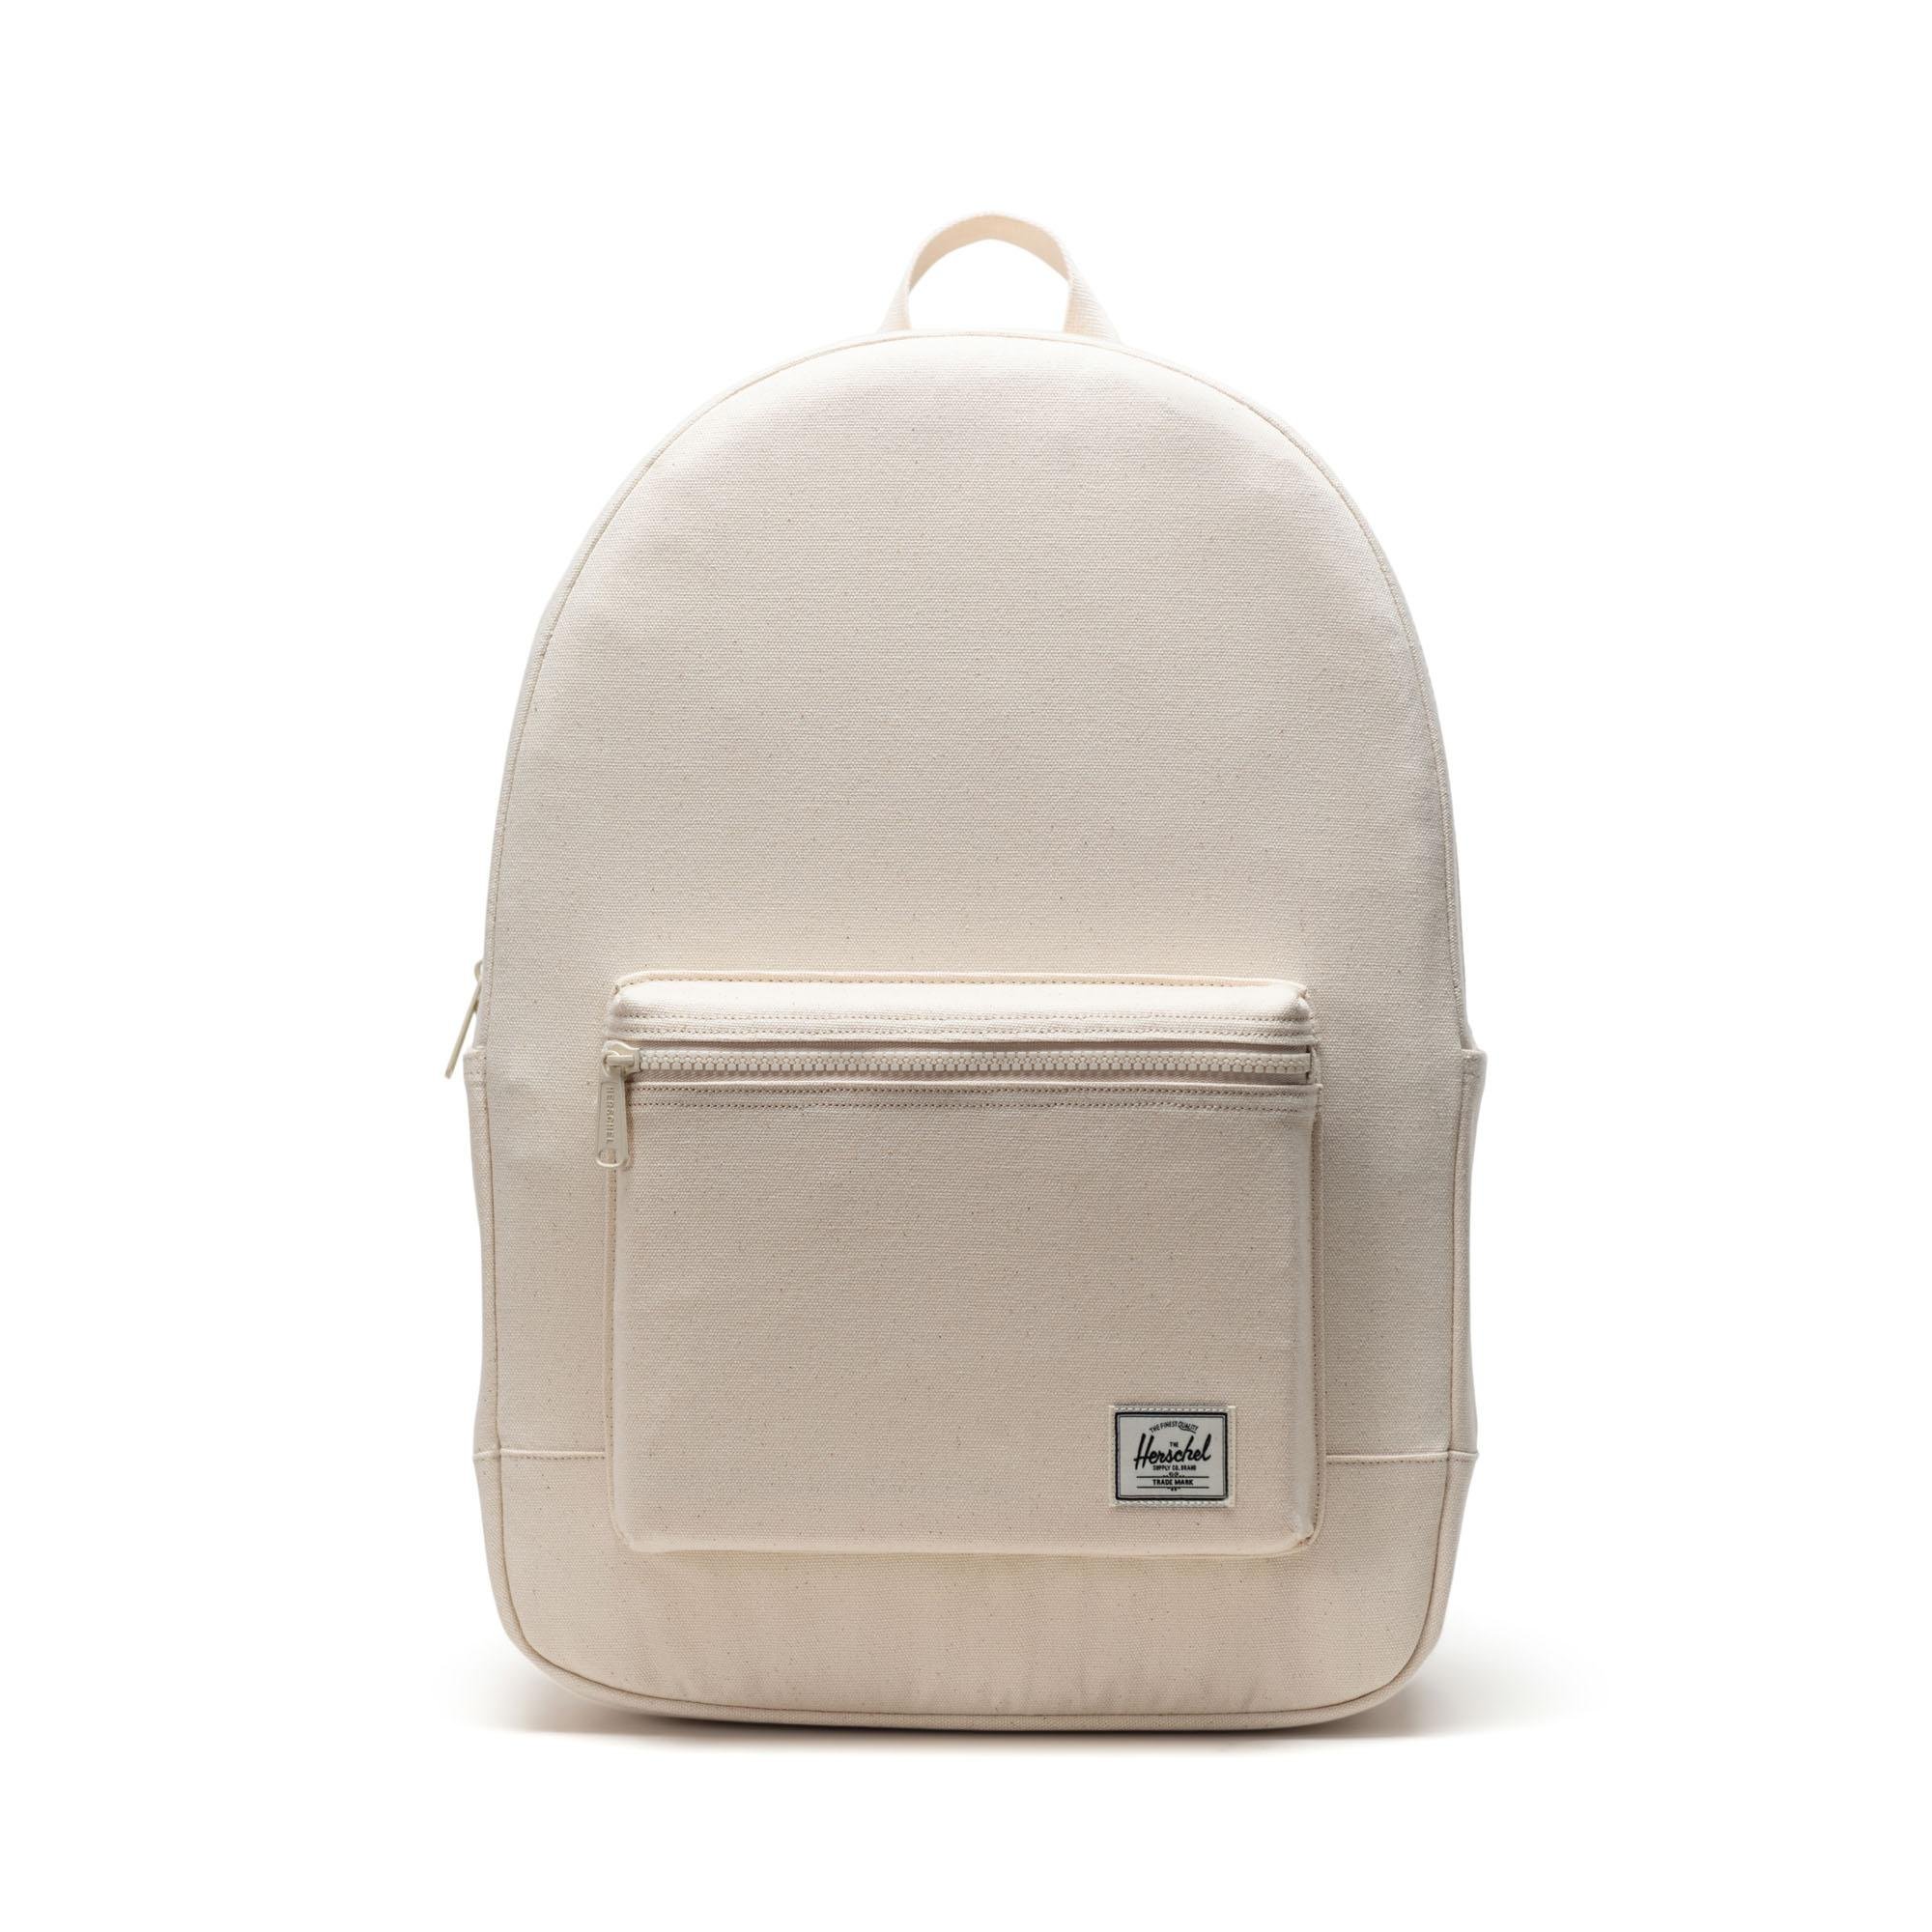 Pacific Daypack - 23.5L by HERSCHEL SUPPLY CO